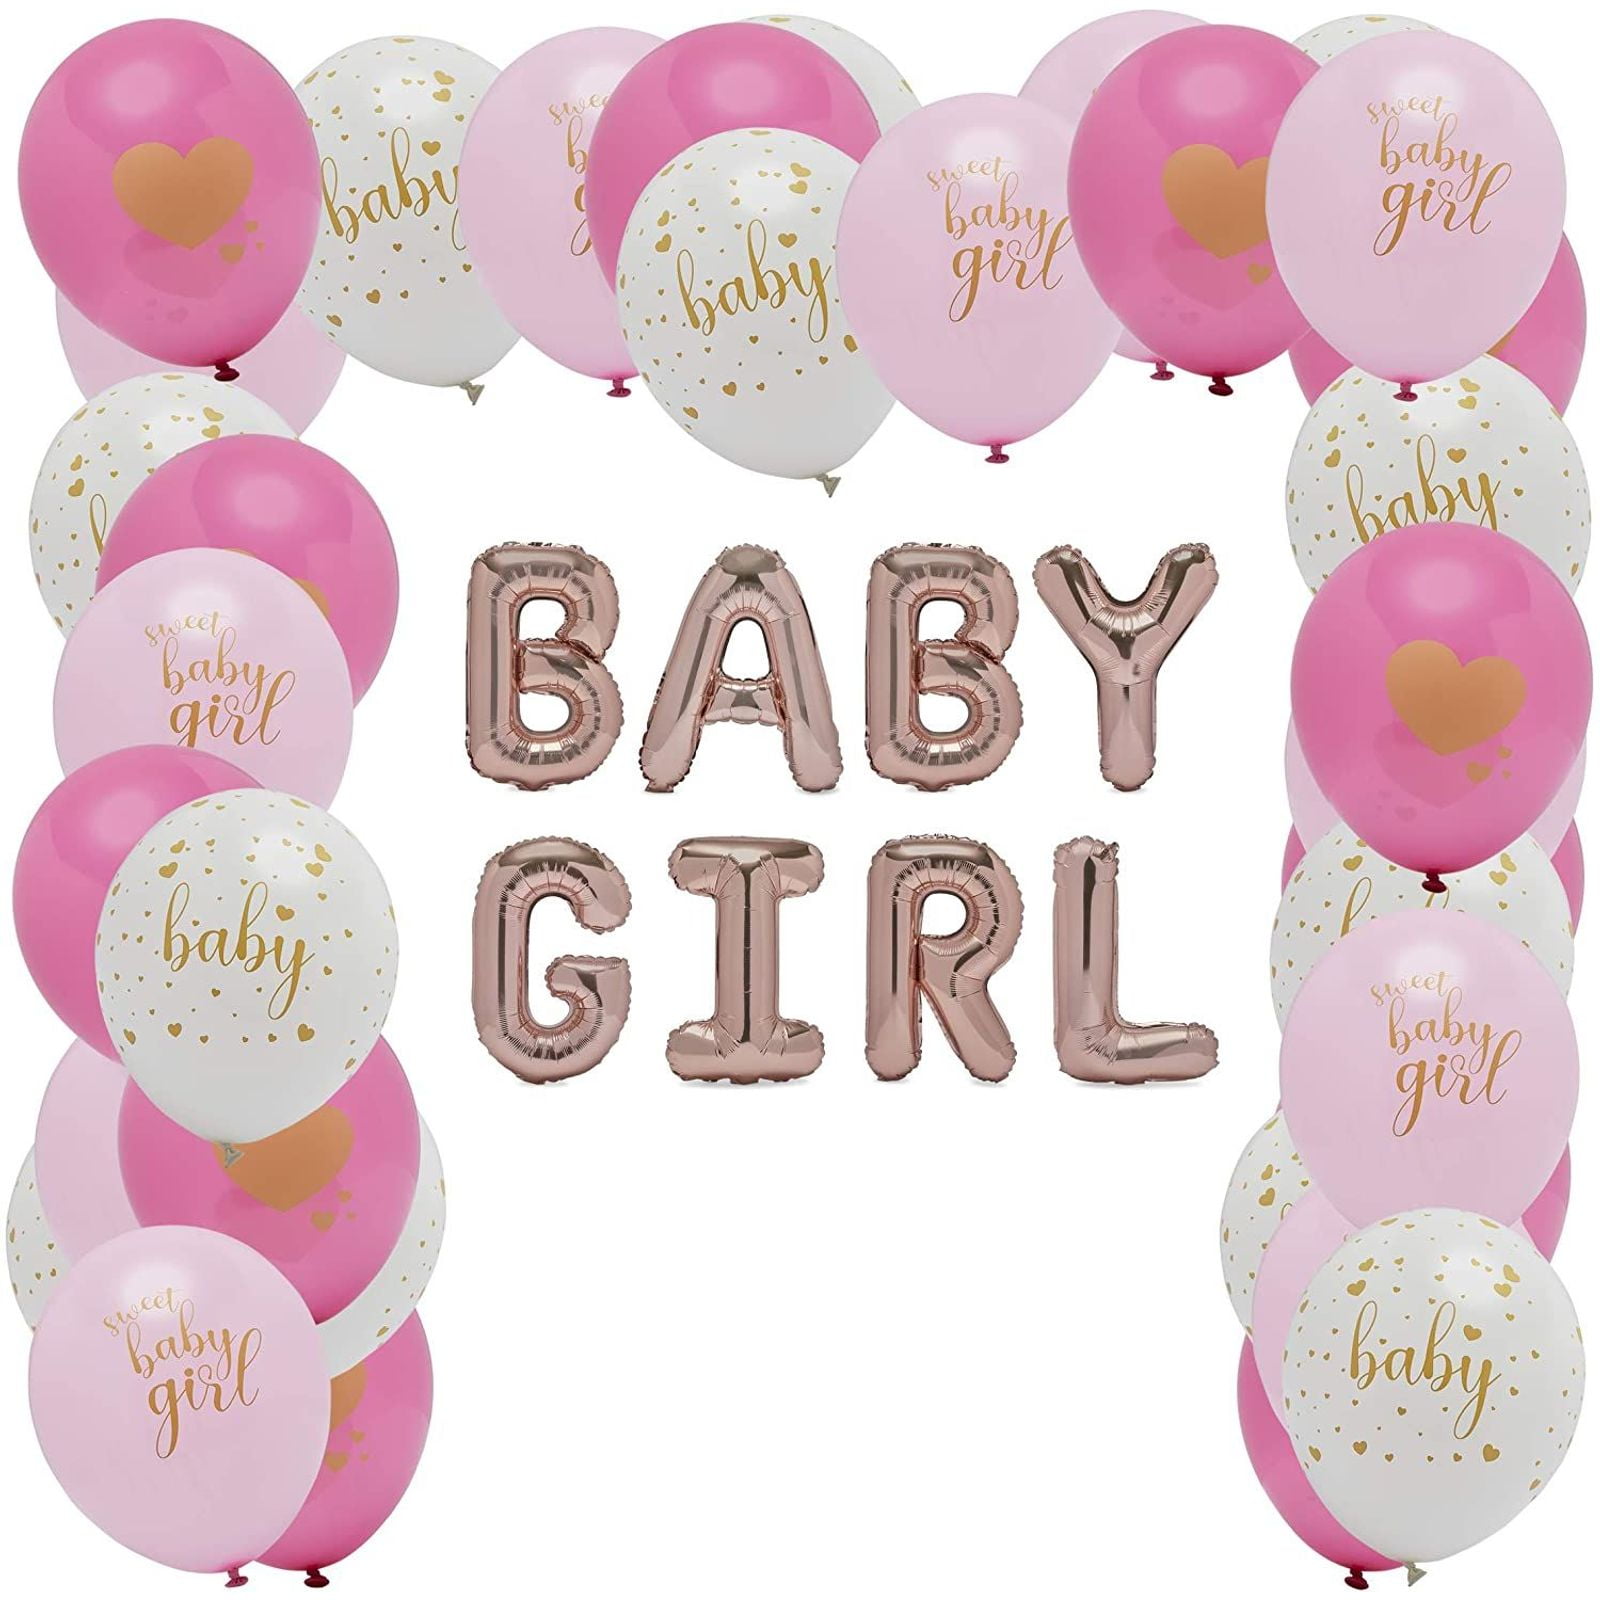 PINK/GOLD/WHITE PEARL 10" LATEX PARTY BALLOONS BABY SHOWER CHRISTENING NEW BORN 